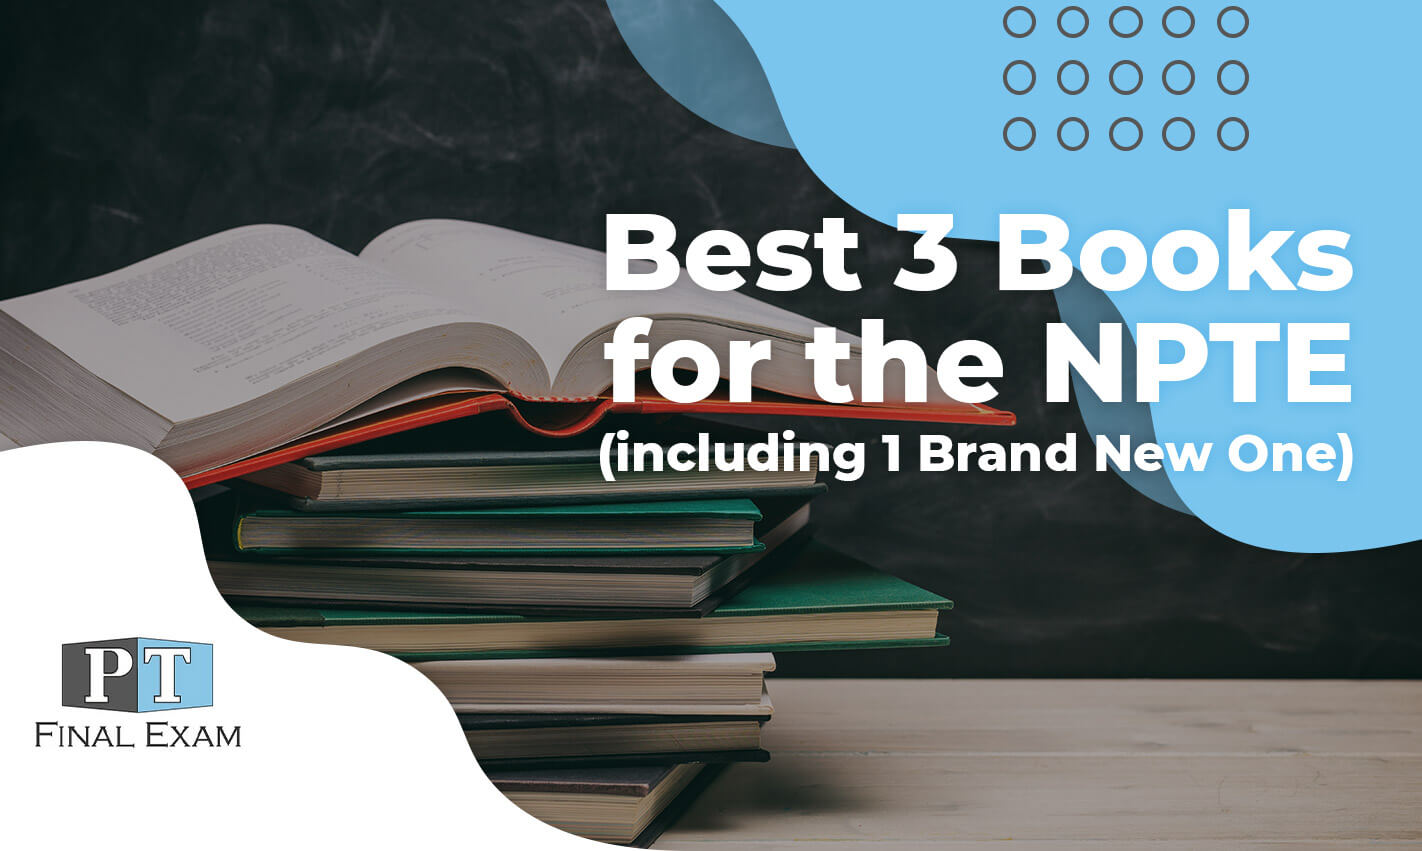 Best 3 Books for the NPTE (including 1 Brand New One) PT Final Exam